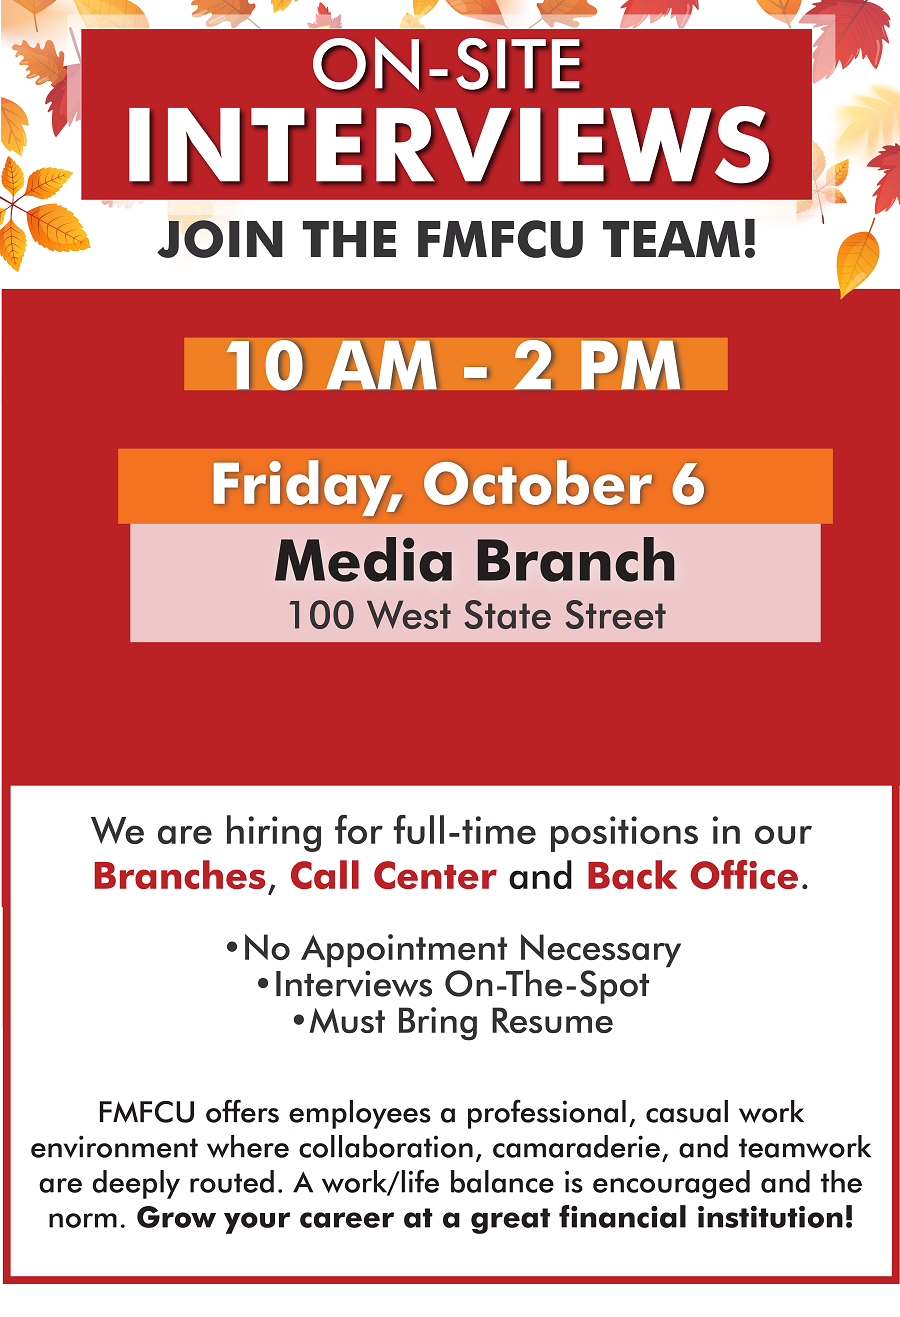 On-Site Interviews 10/6 at Media Branch